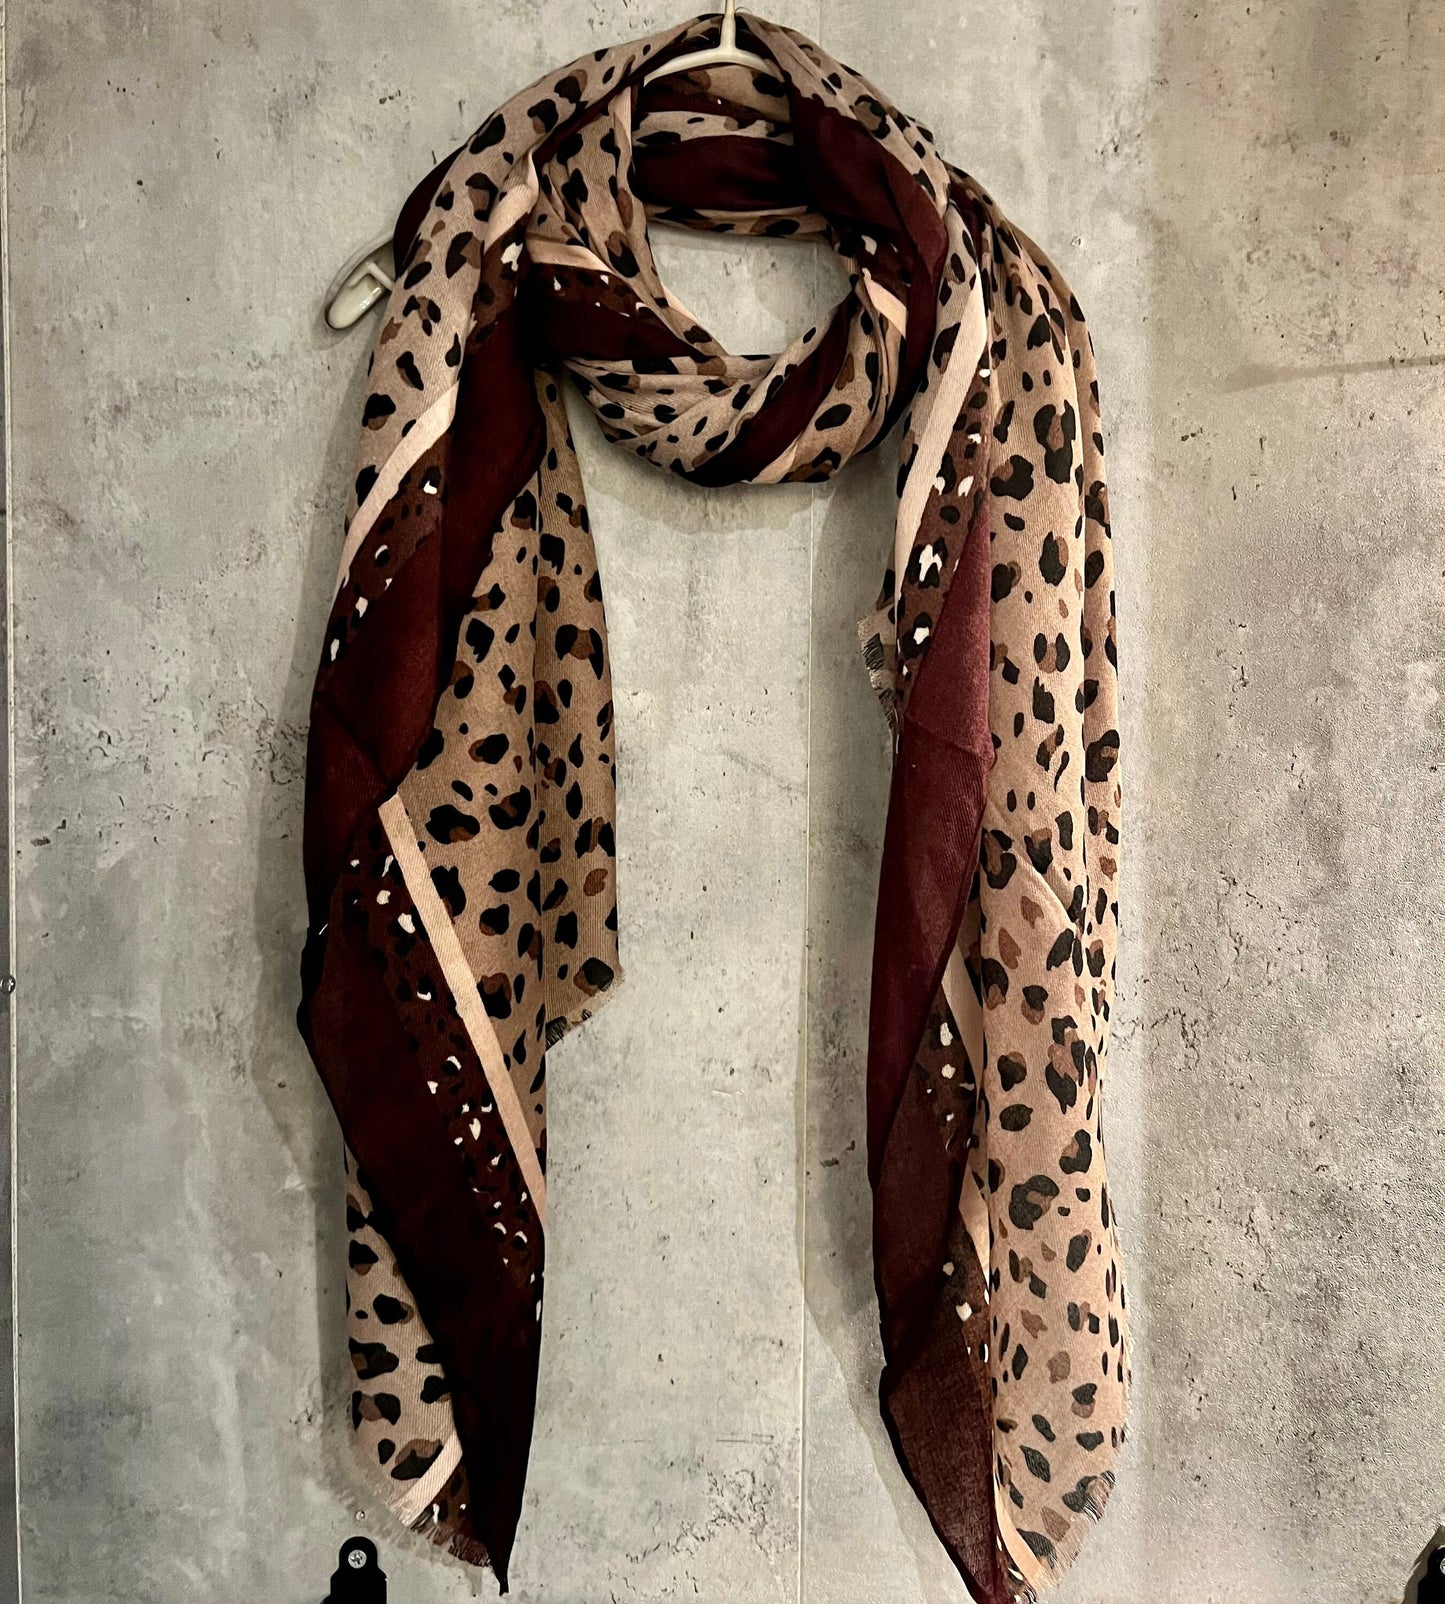 Leopard Pattern With Brown Trim Beige Cotton Scarf/Summer  Autumn Scarf/Scarf Women/Gifts For Mum/Gifts For Her Birthday Christmas/UK Seller